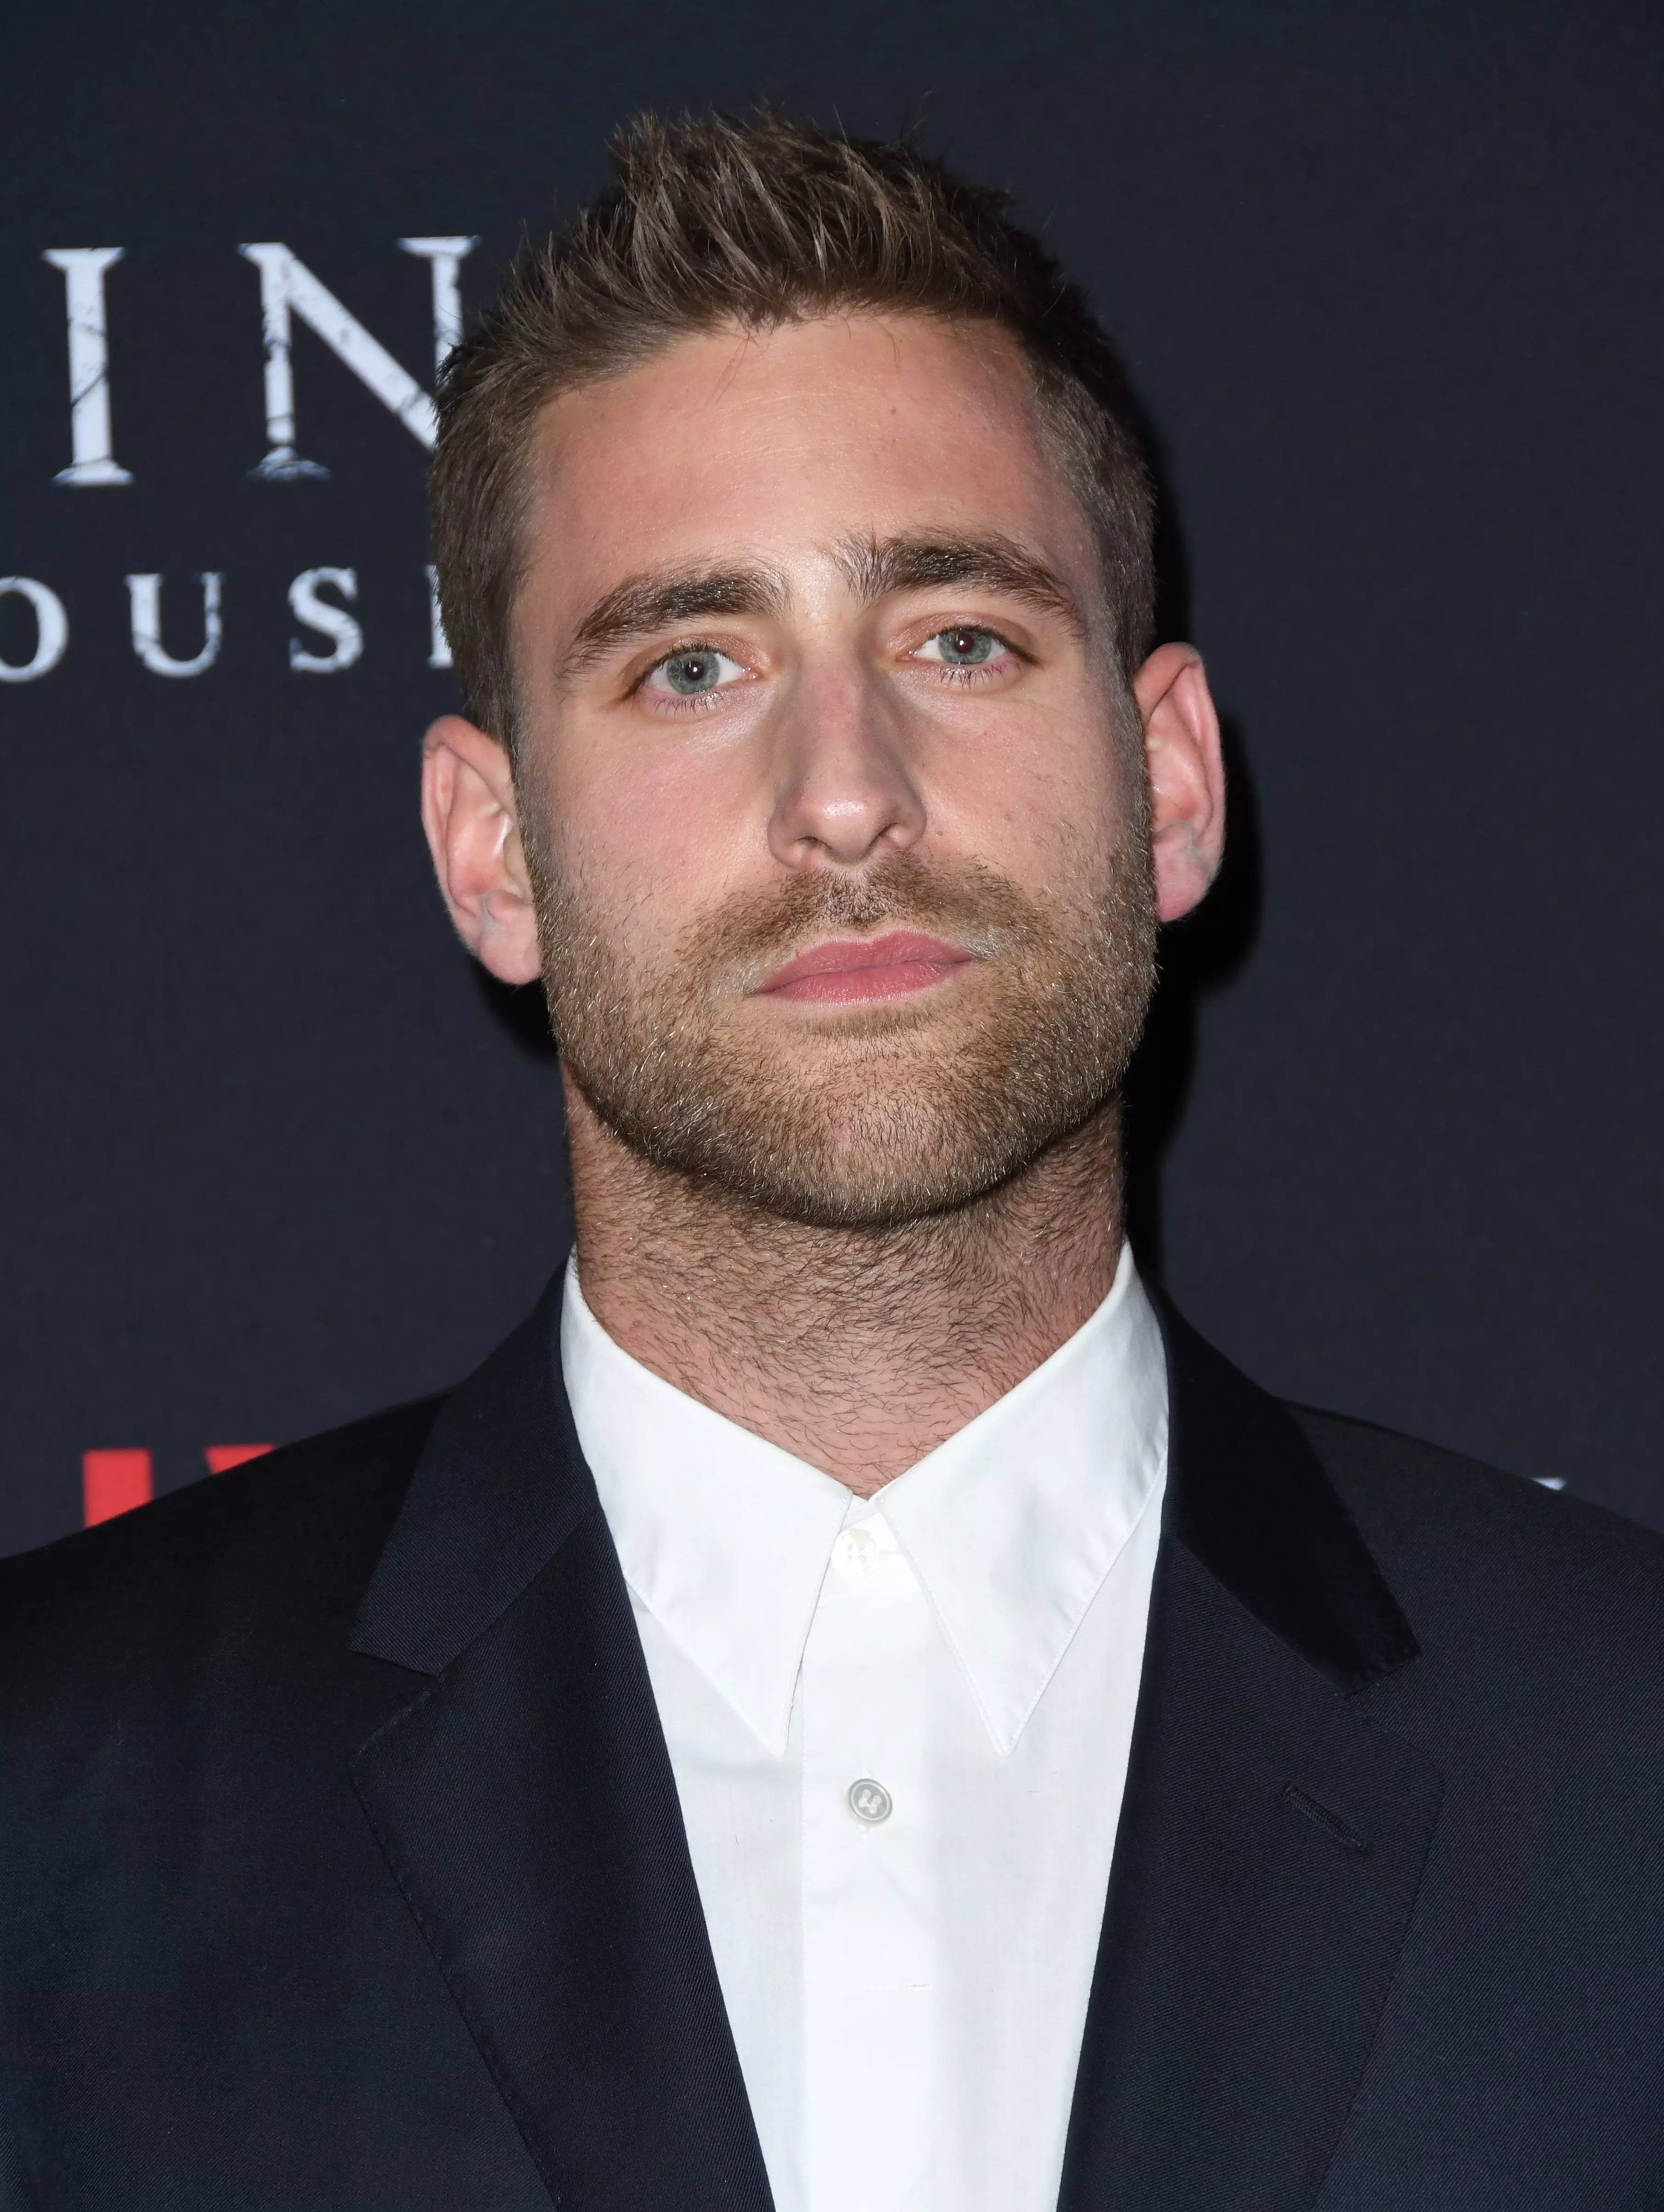 Oliver Jackson-Cohen said the second season is a 'very, very exciting story'.